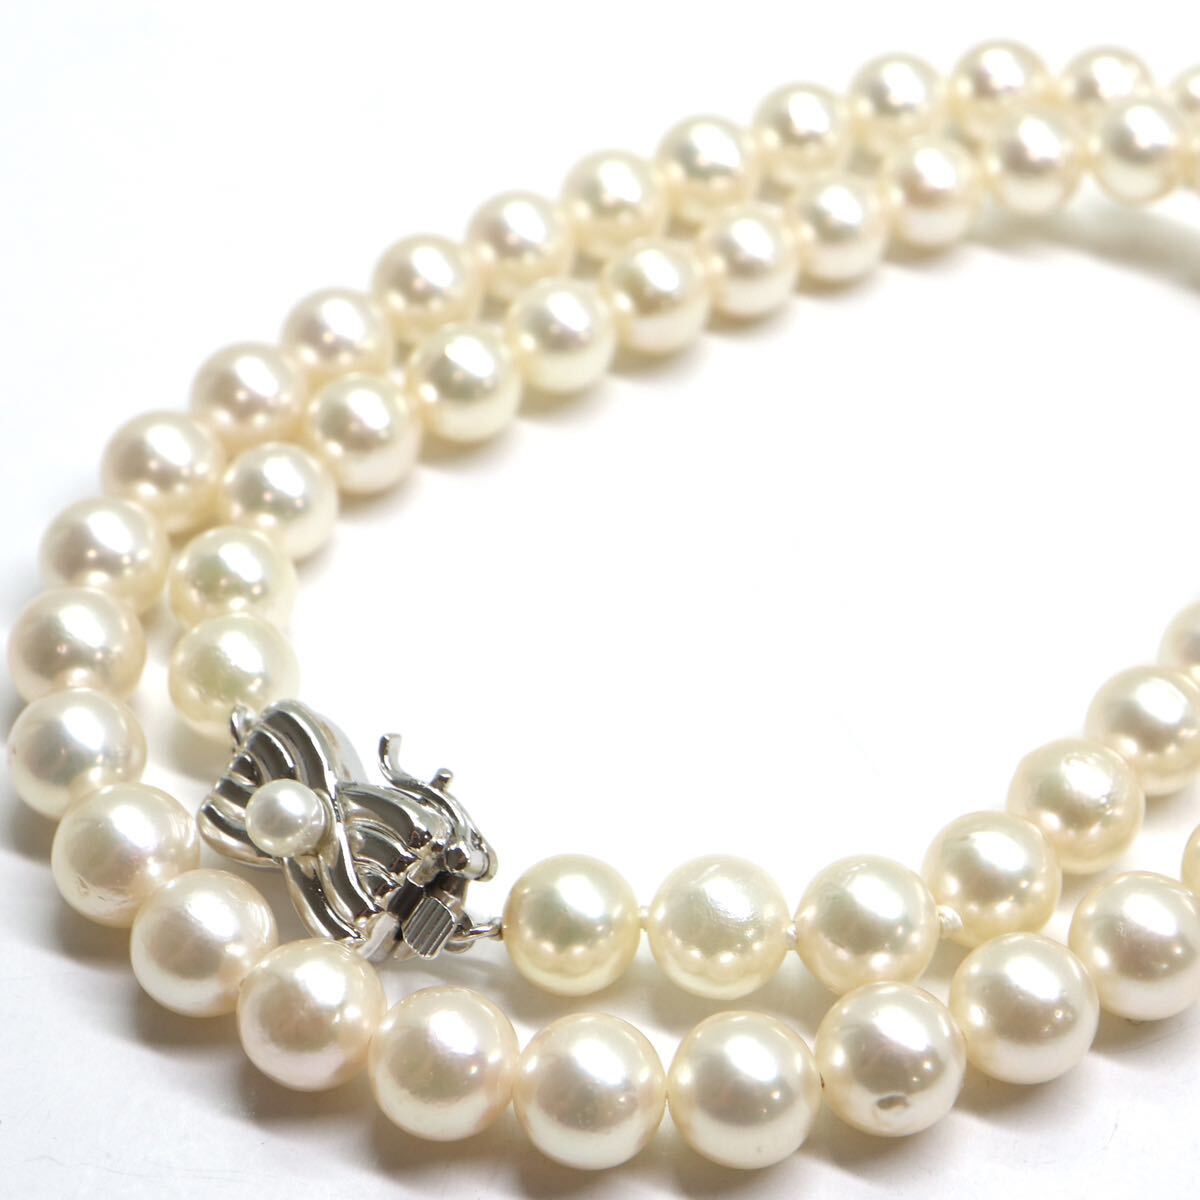 TASAKI(田崎真珠)良質!!箱付き!!《アコヤ本真珠ネックレス》A ◎約6.5-7.0mm珠 27.7g 43cm pearl necklace ジュエリー jewelry EH0/EH0の画像1